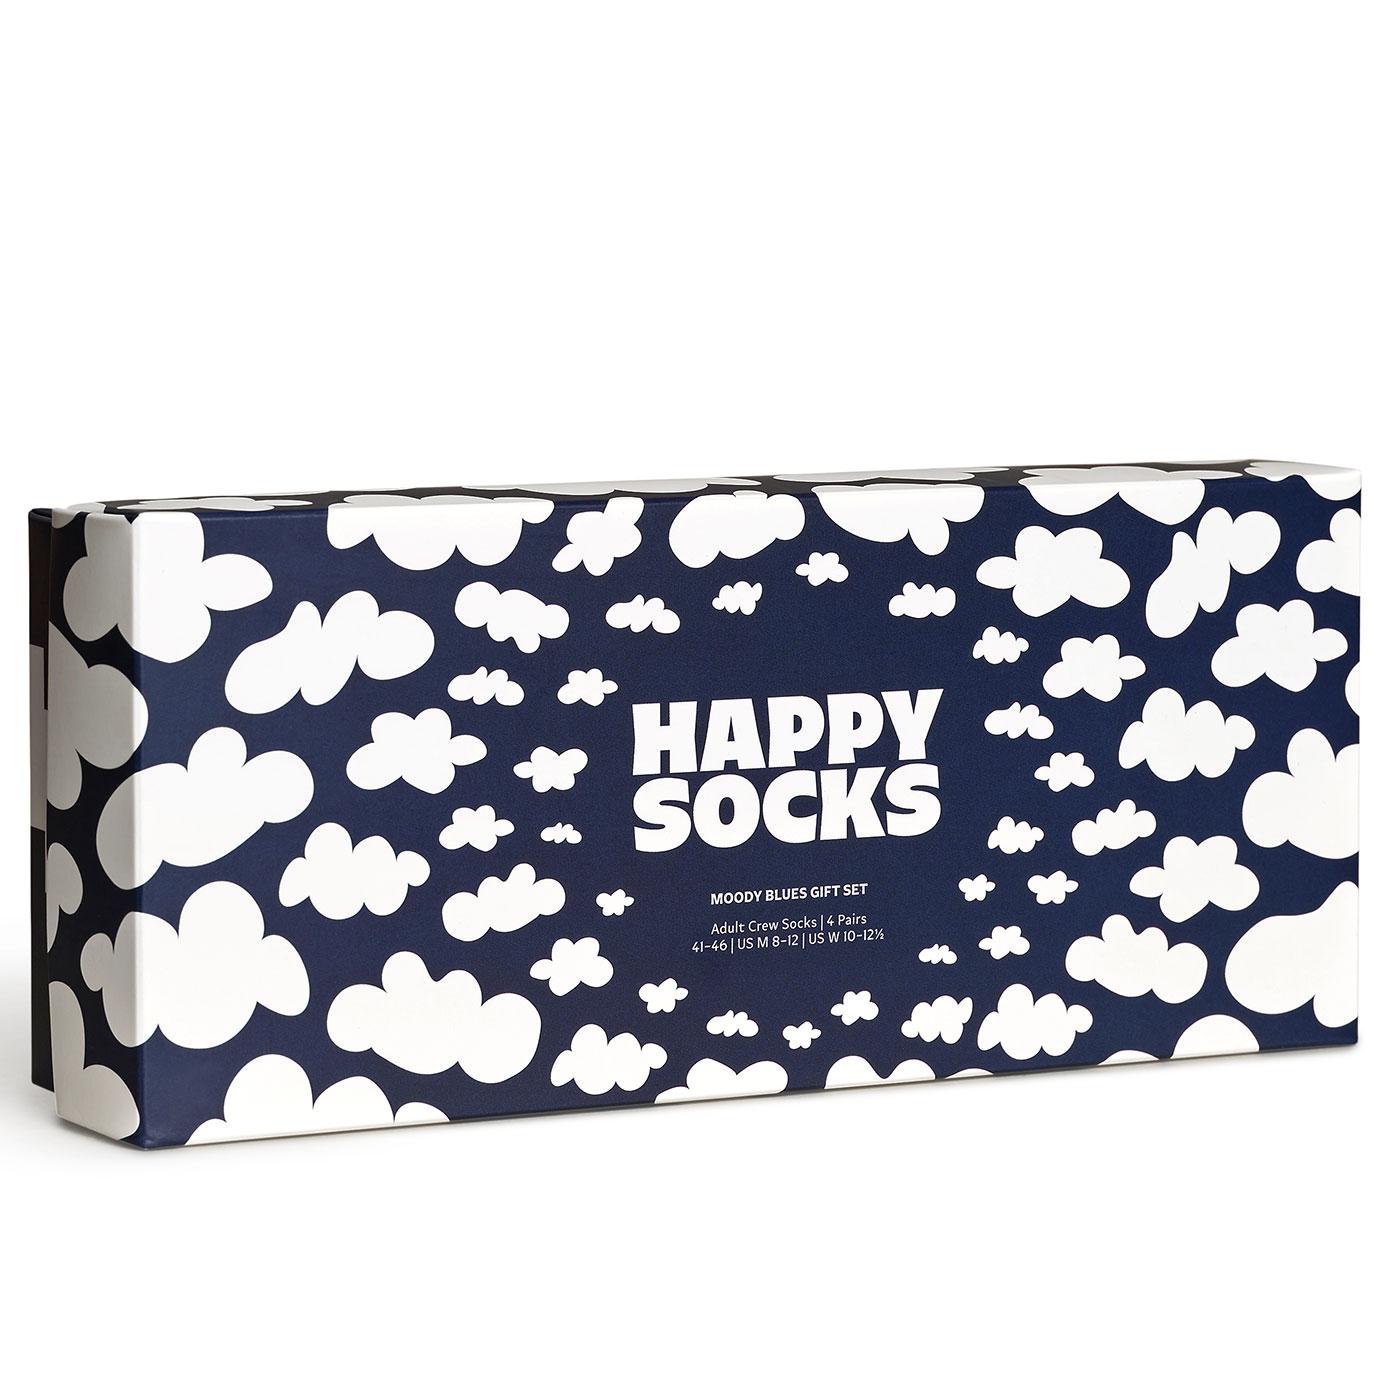 Happy Socks Moody Blues Four Pack Boxed Gift Set Navy Blue